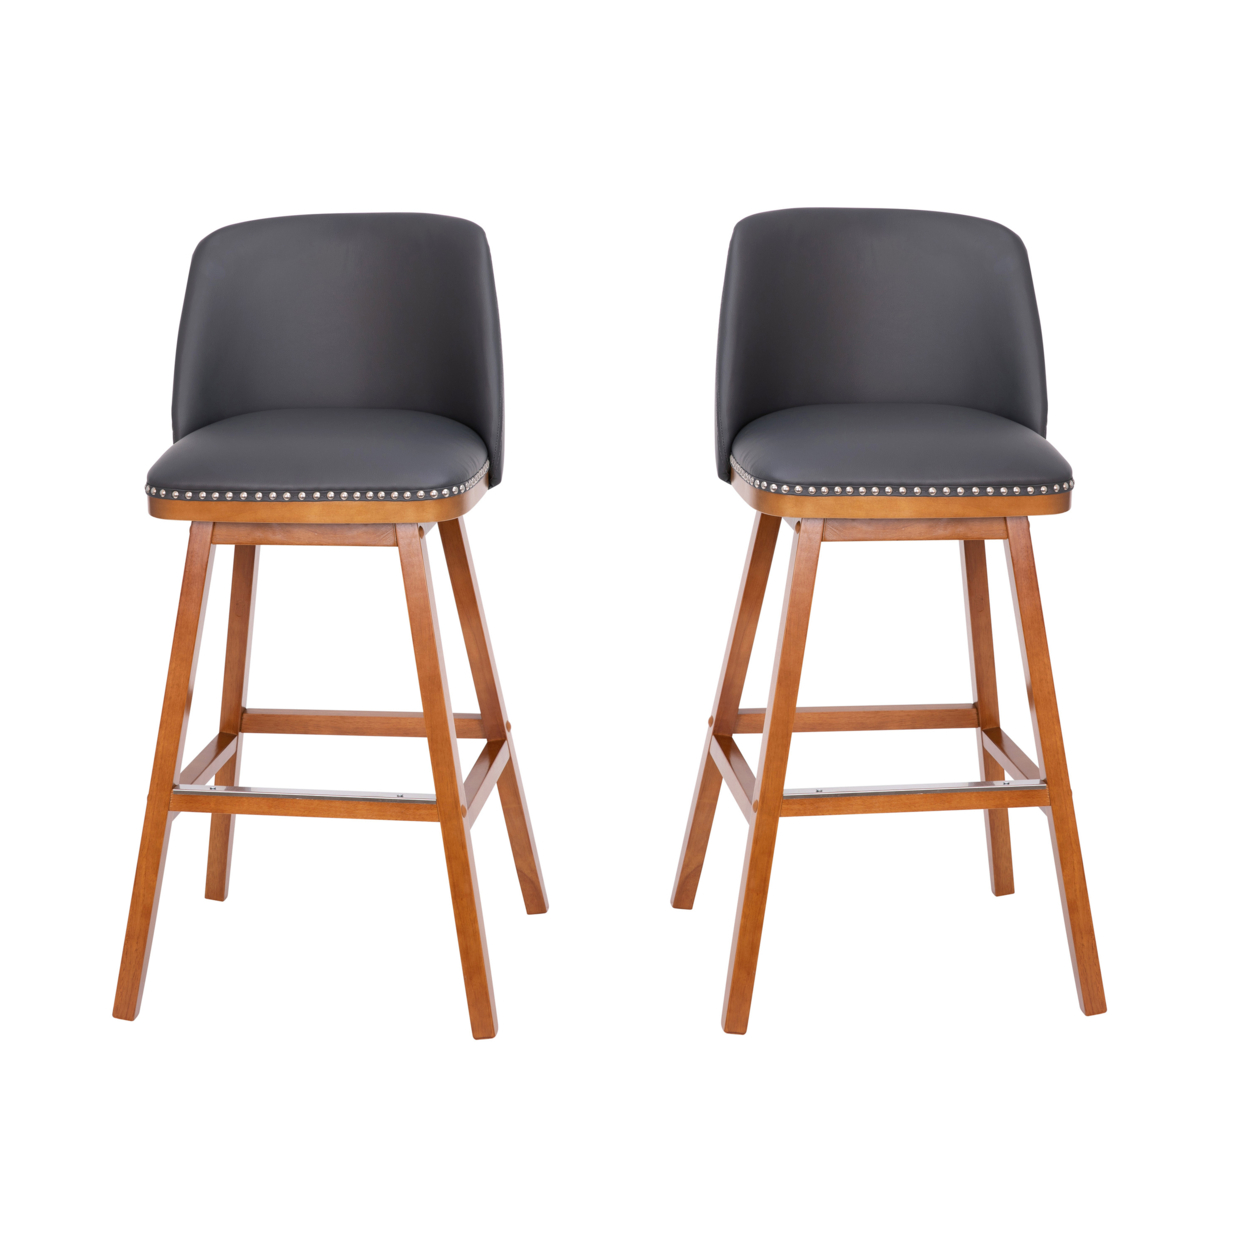 2 Piece 30 Inch Leather Stools, Curved Back, Seat, Nailhead Trims, Gray